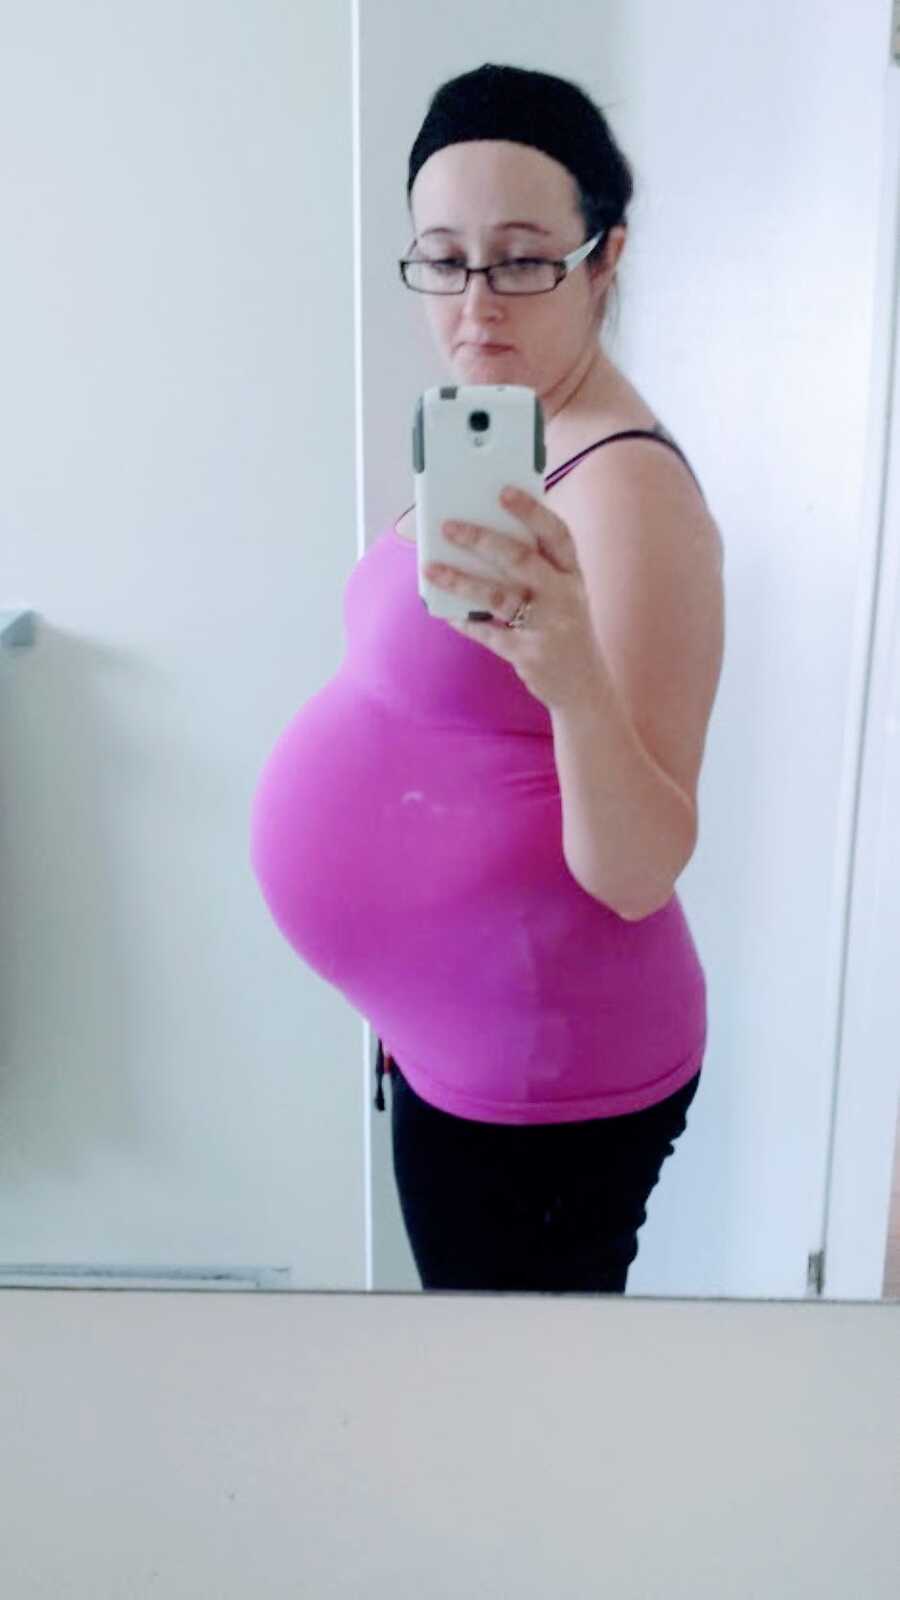 Heavily pregnant woman takes a mirror selfie, showing off her belly bump in a purple tanktop